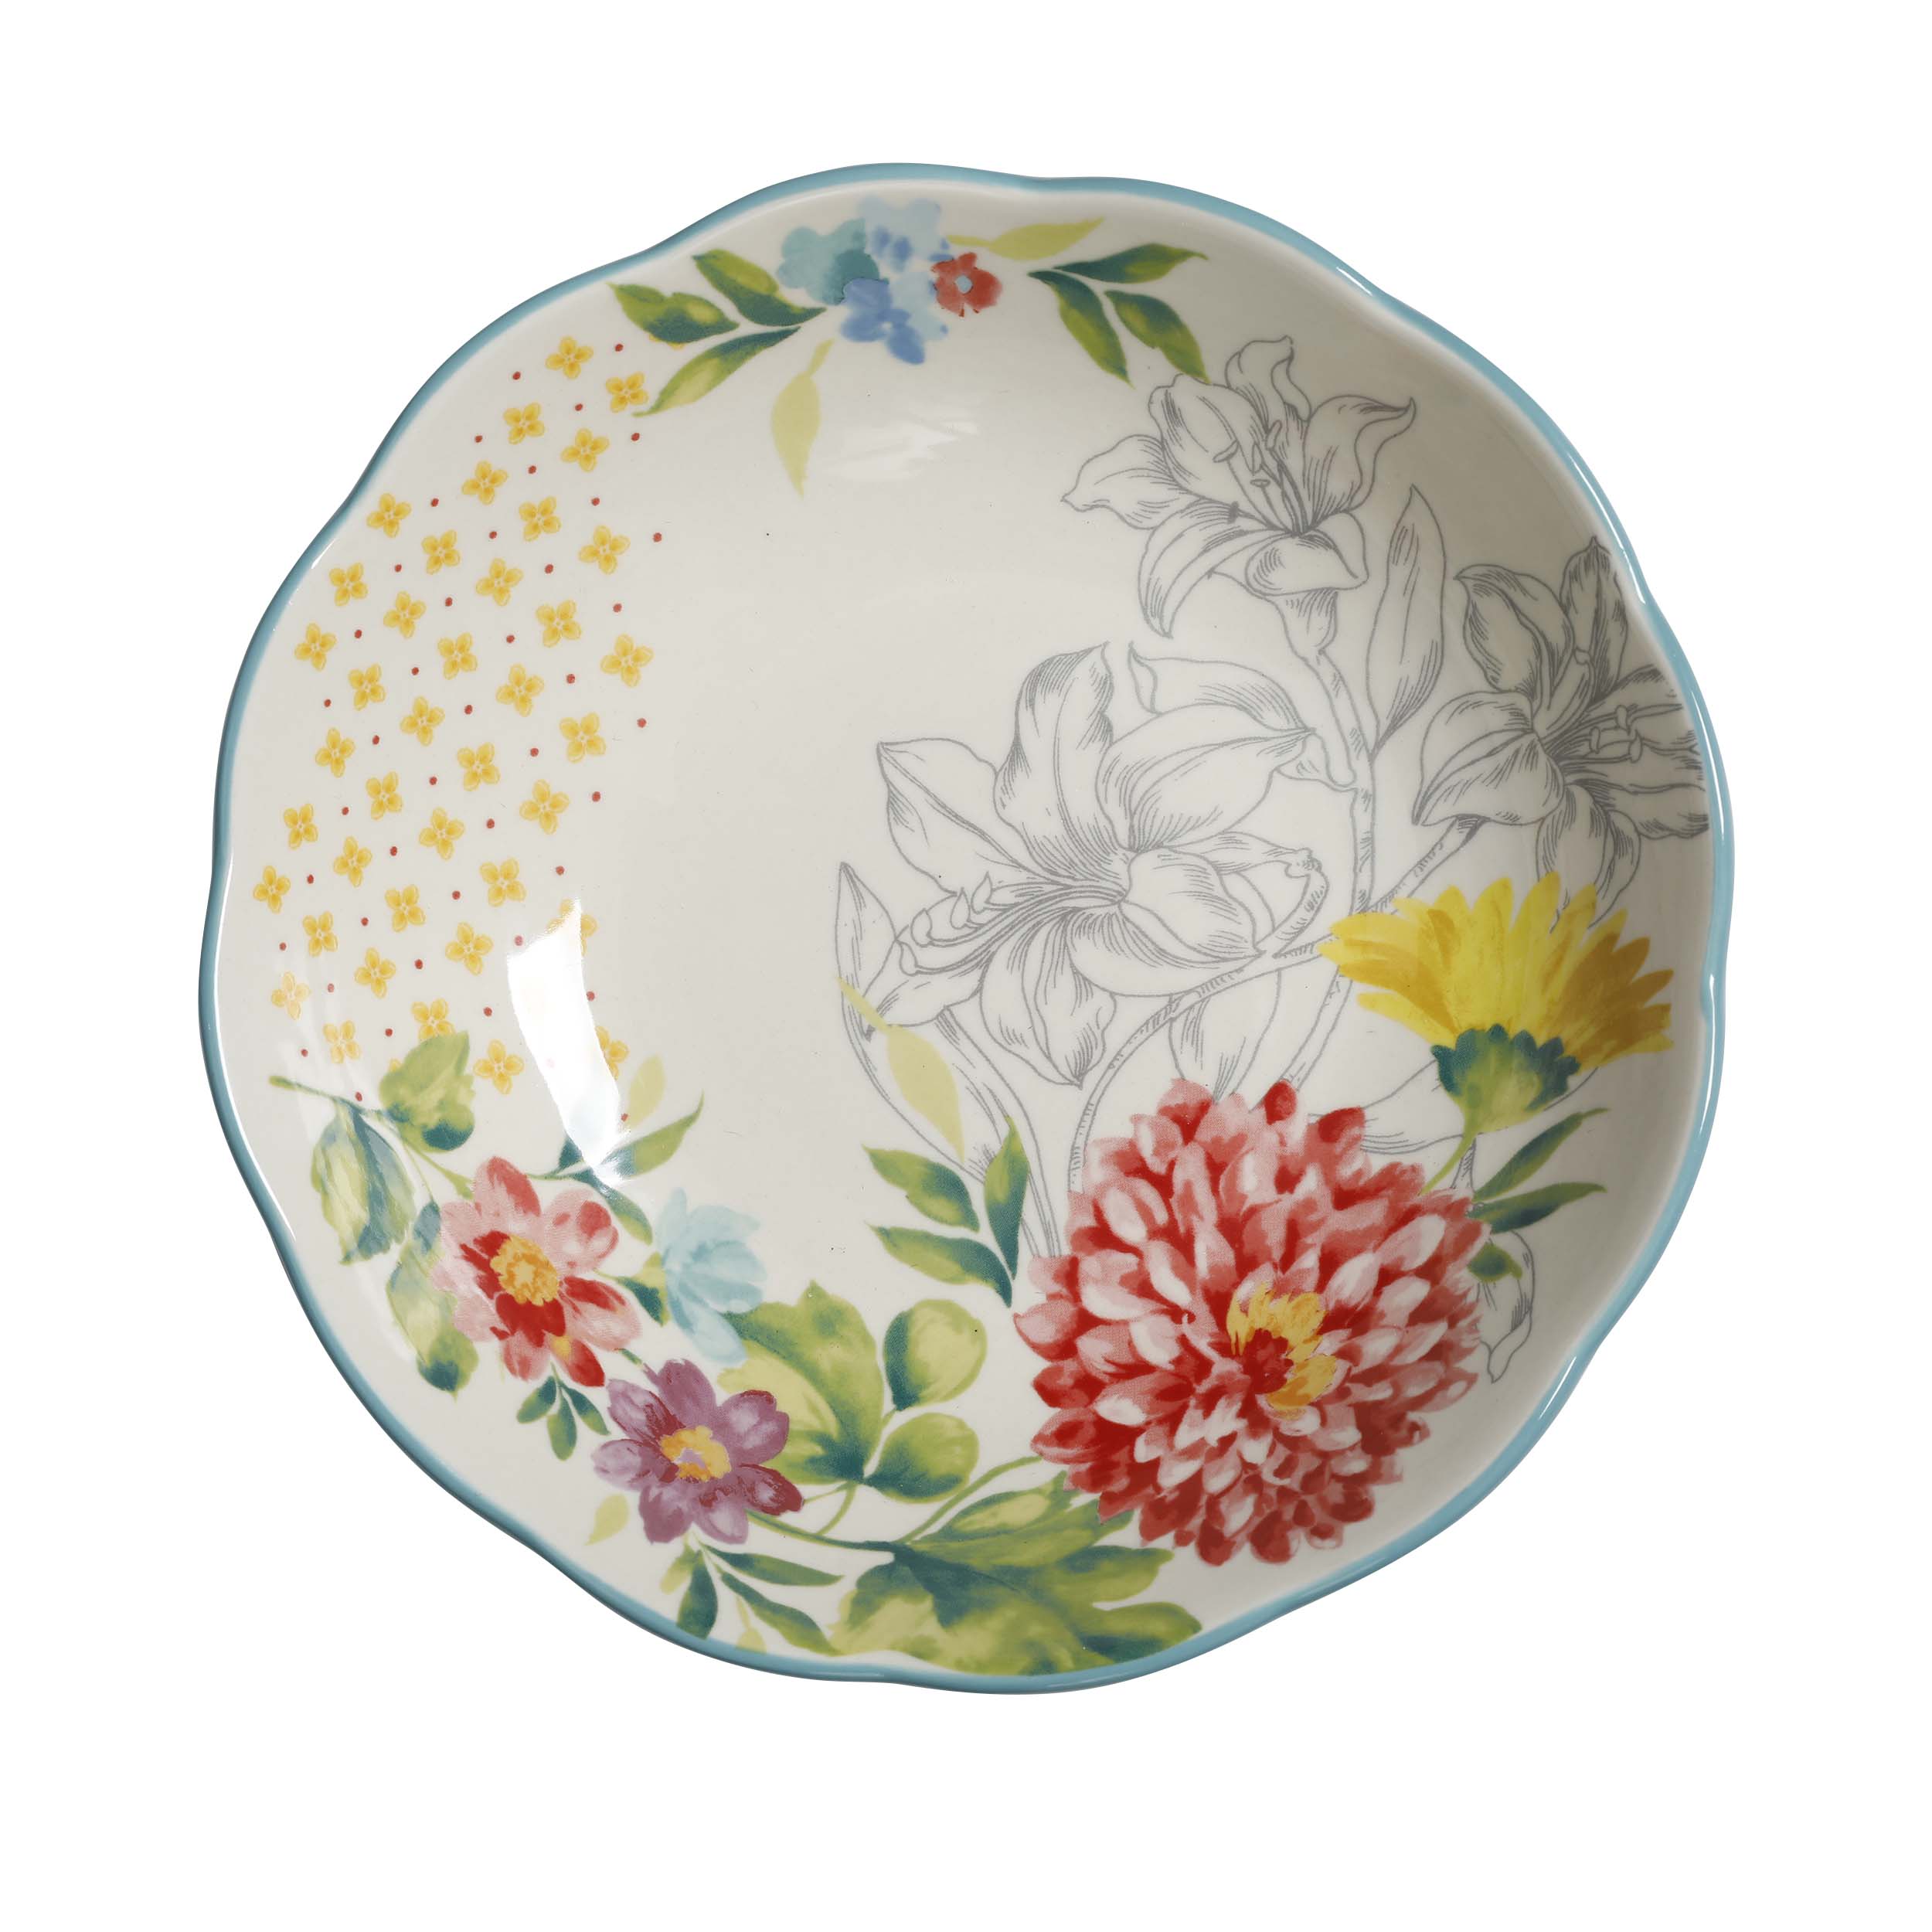 The Pioneer Woman Floral Medley Assorted Ceramic 7.5-inch Pasta Bowls, 3-Pack - image 5 of 9